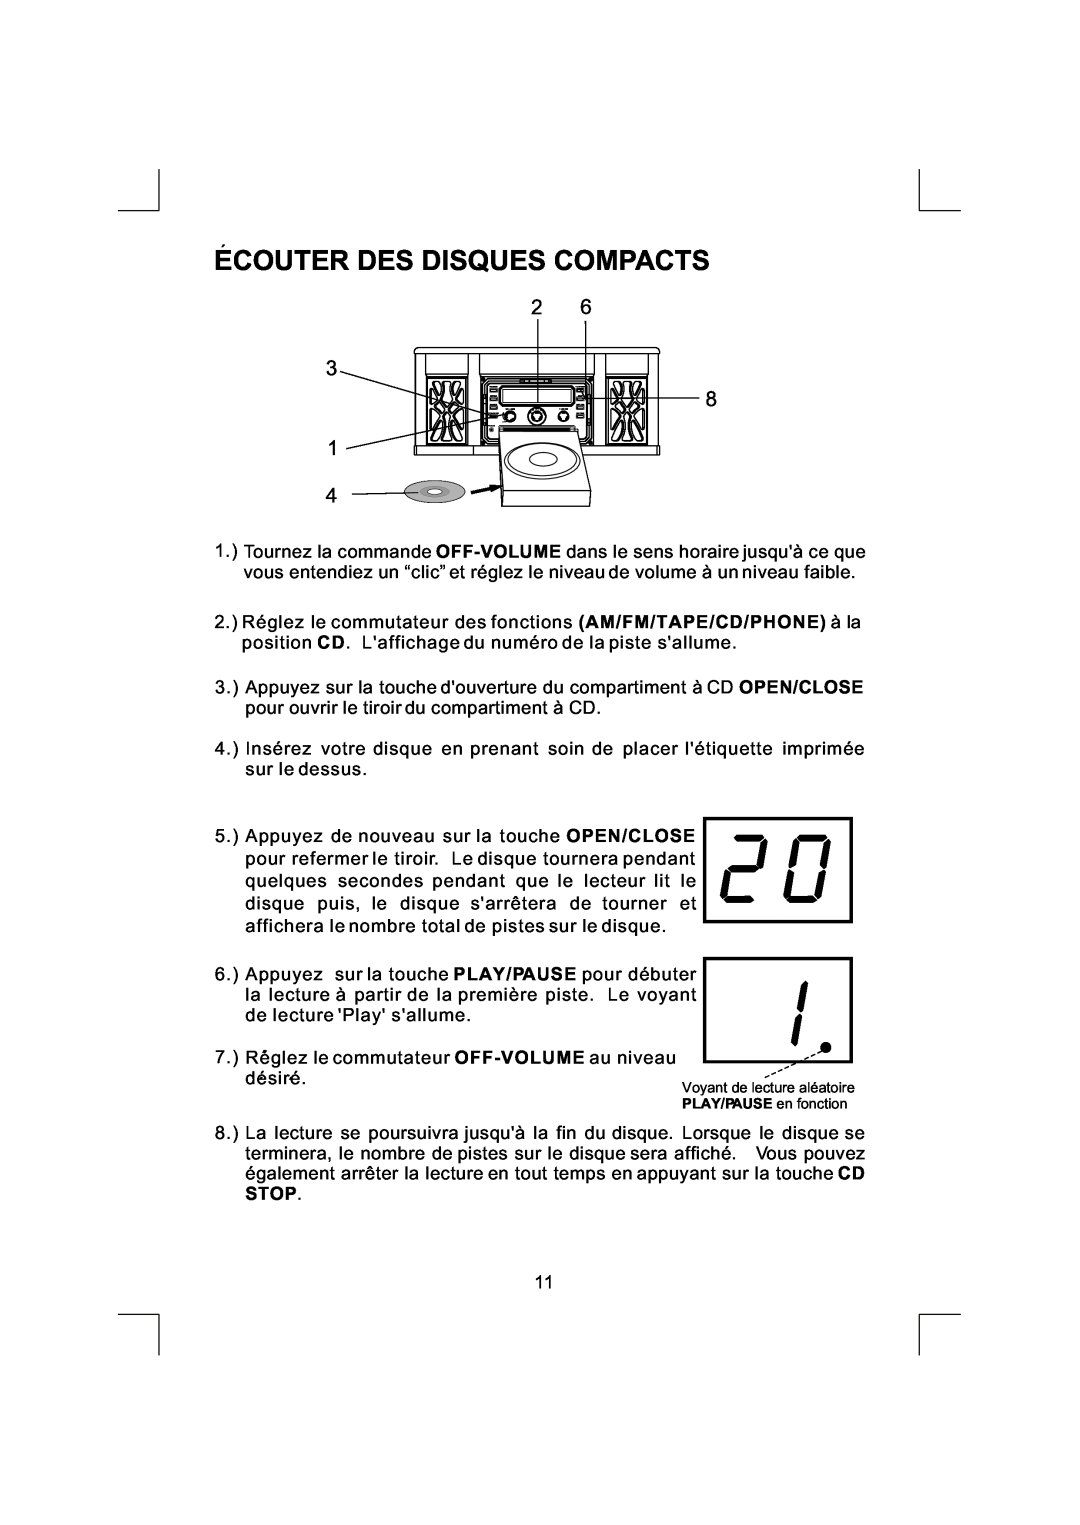 Emerson NR290TTC owner manual Ecouter Des Disques Compacts, Stop 